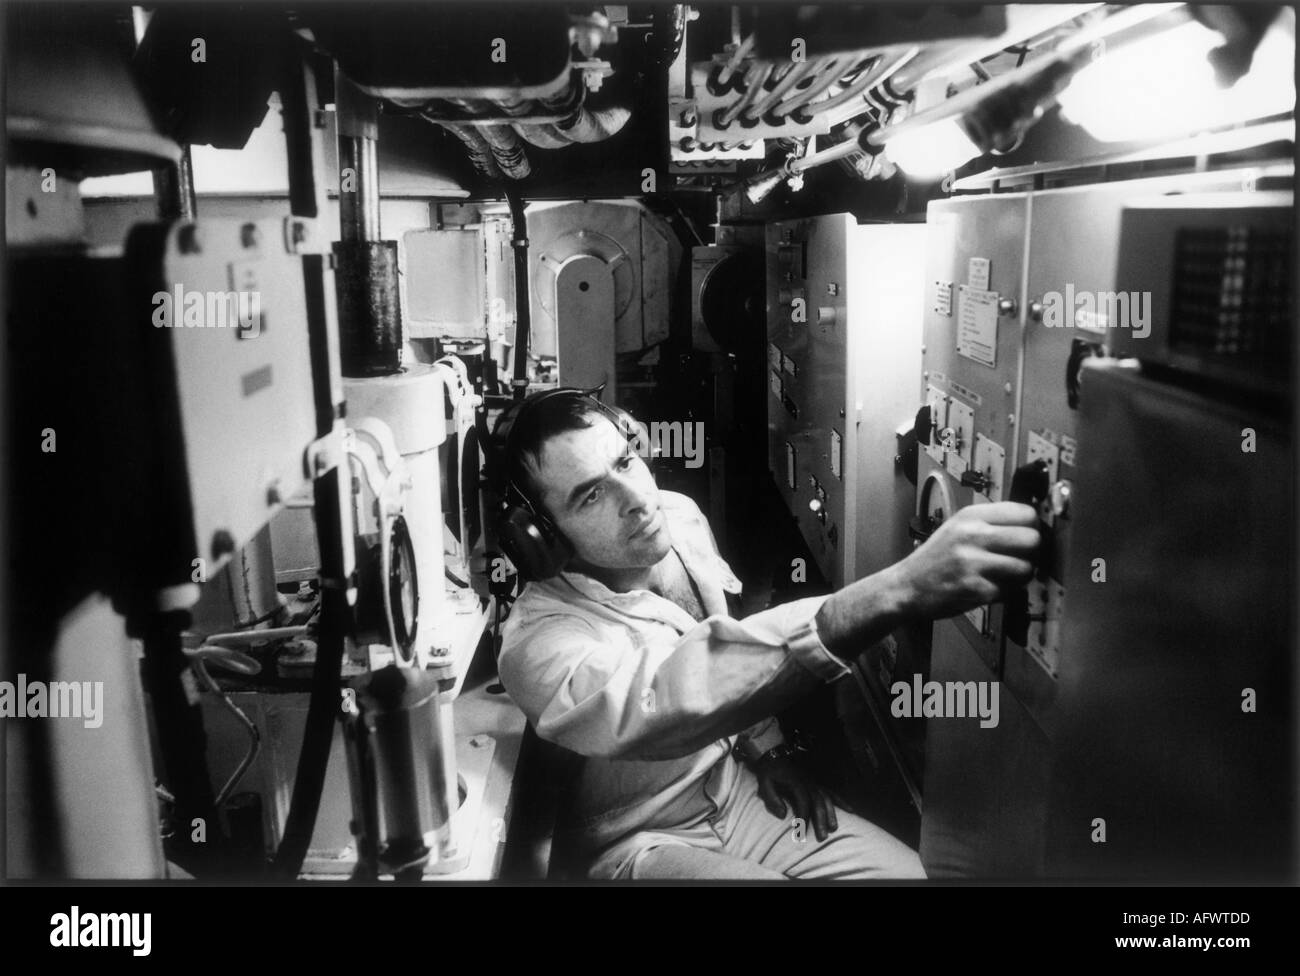 Submarine daily life on HMS Superb, Swiftsure-class nuclear-powered hunter killer sub. Royal Navy crew at work. 2001 2000S  HOMER SYKES Stock Photo